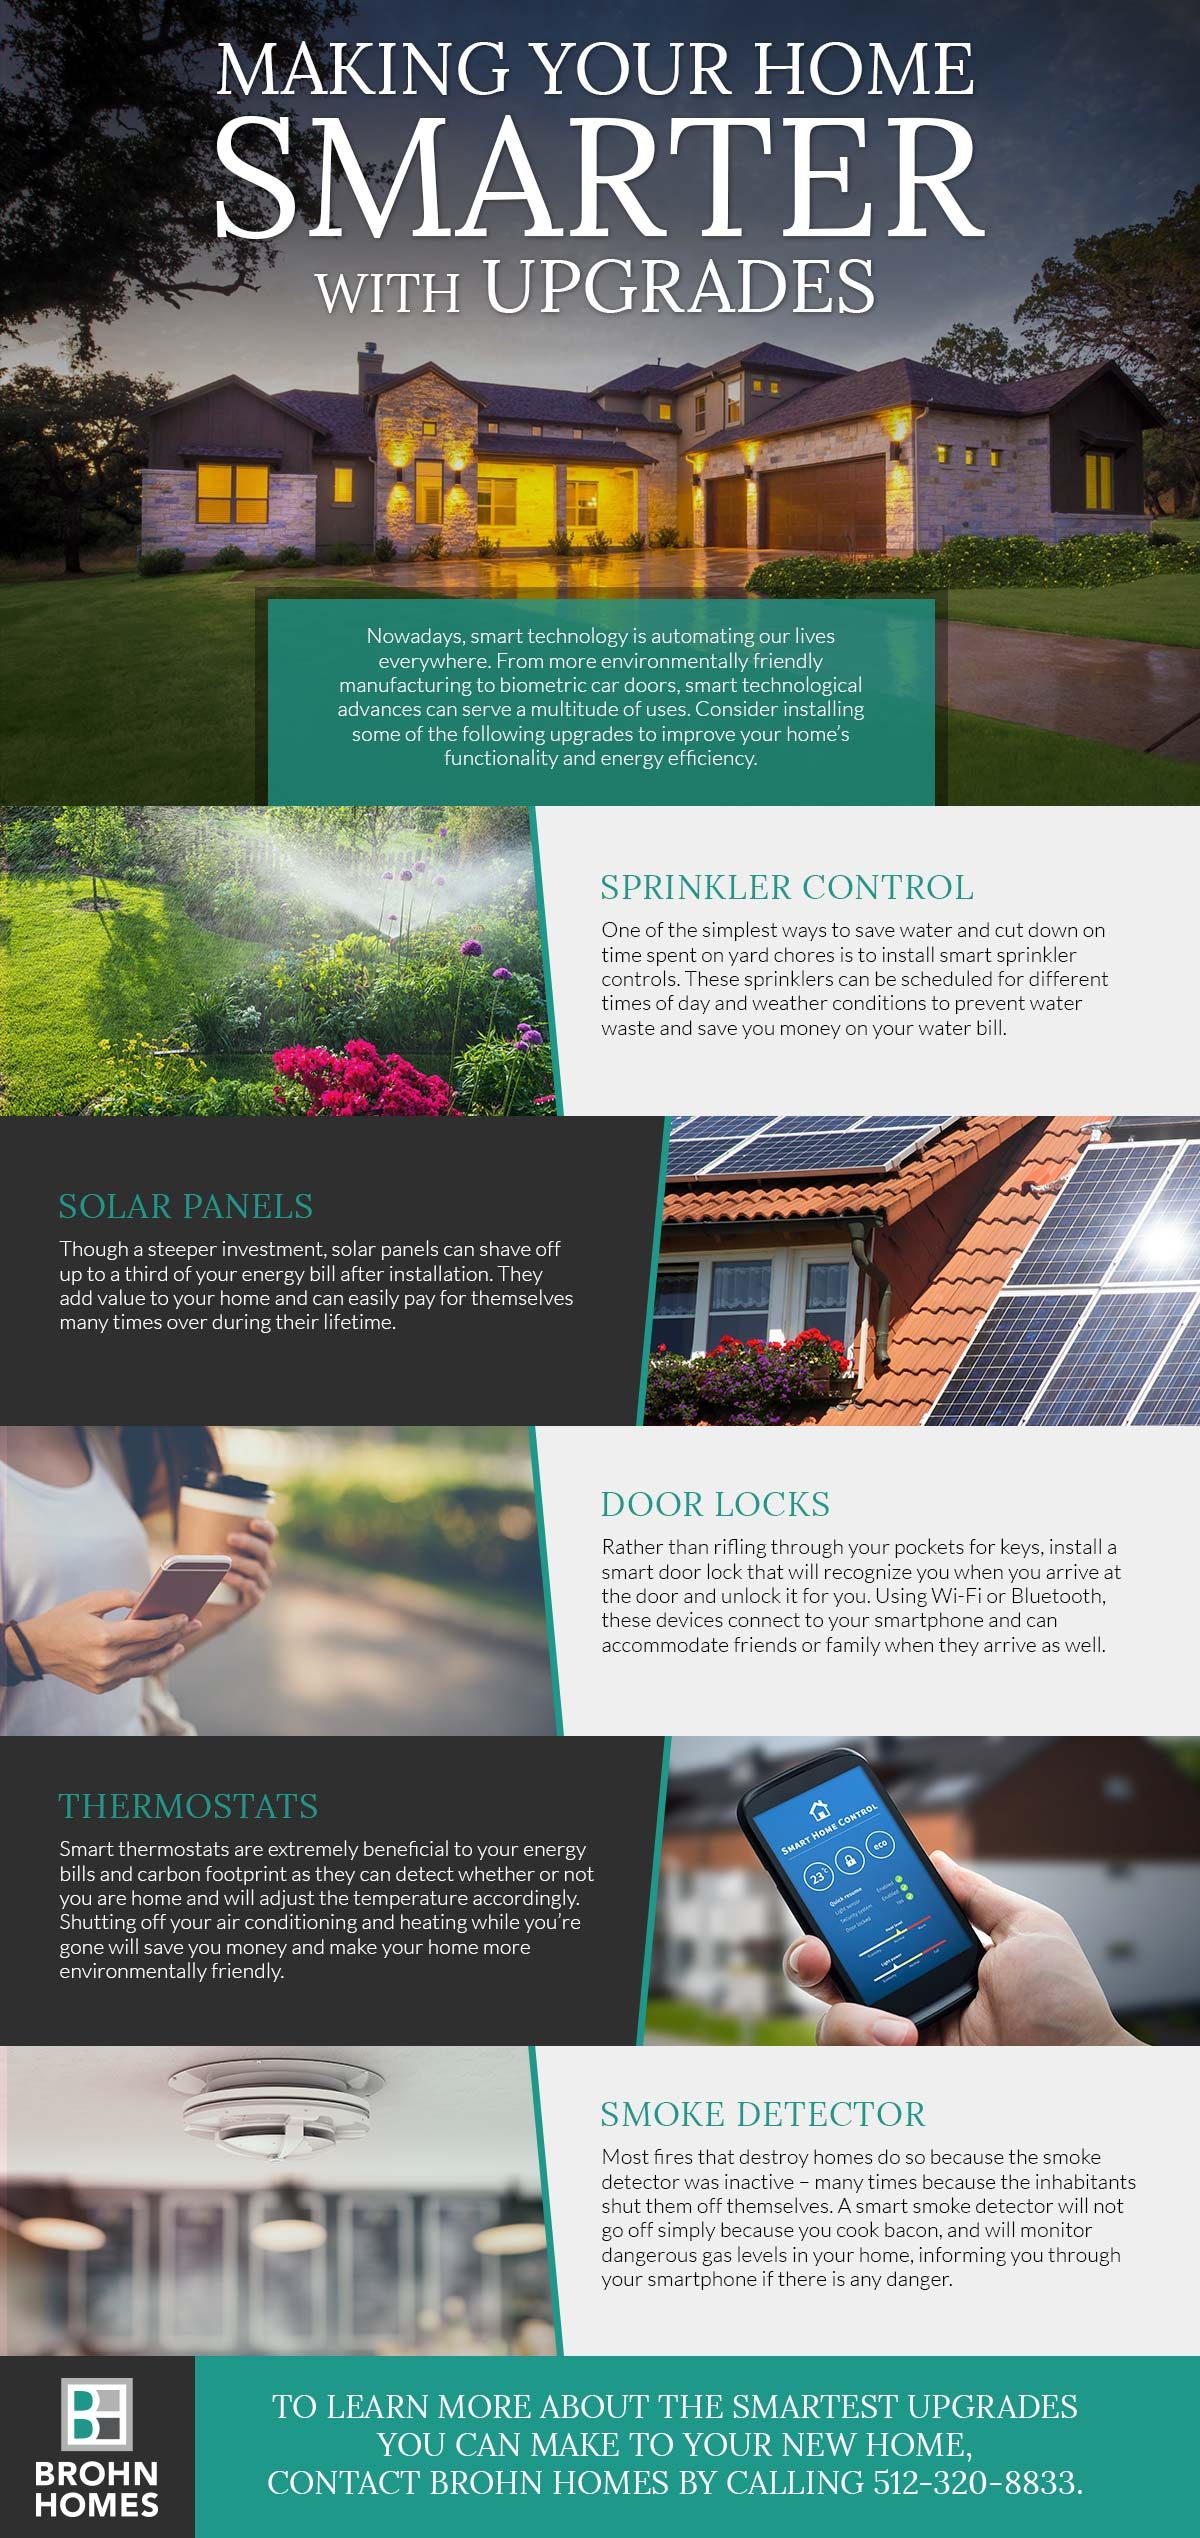 making-your-home-smarter-with-upgrades-infographic_large-3510211